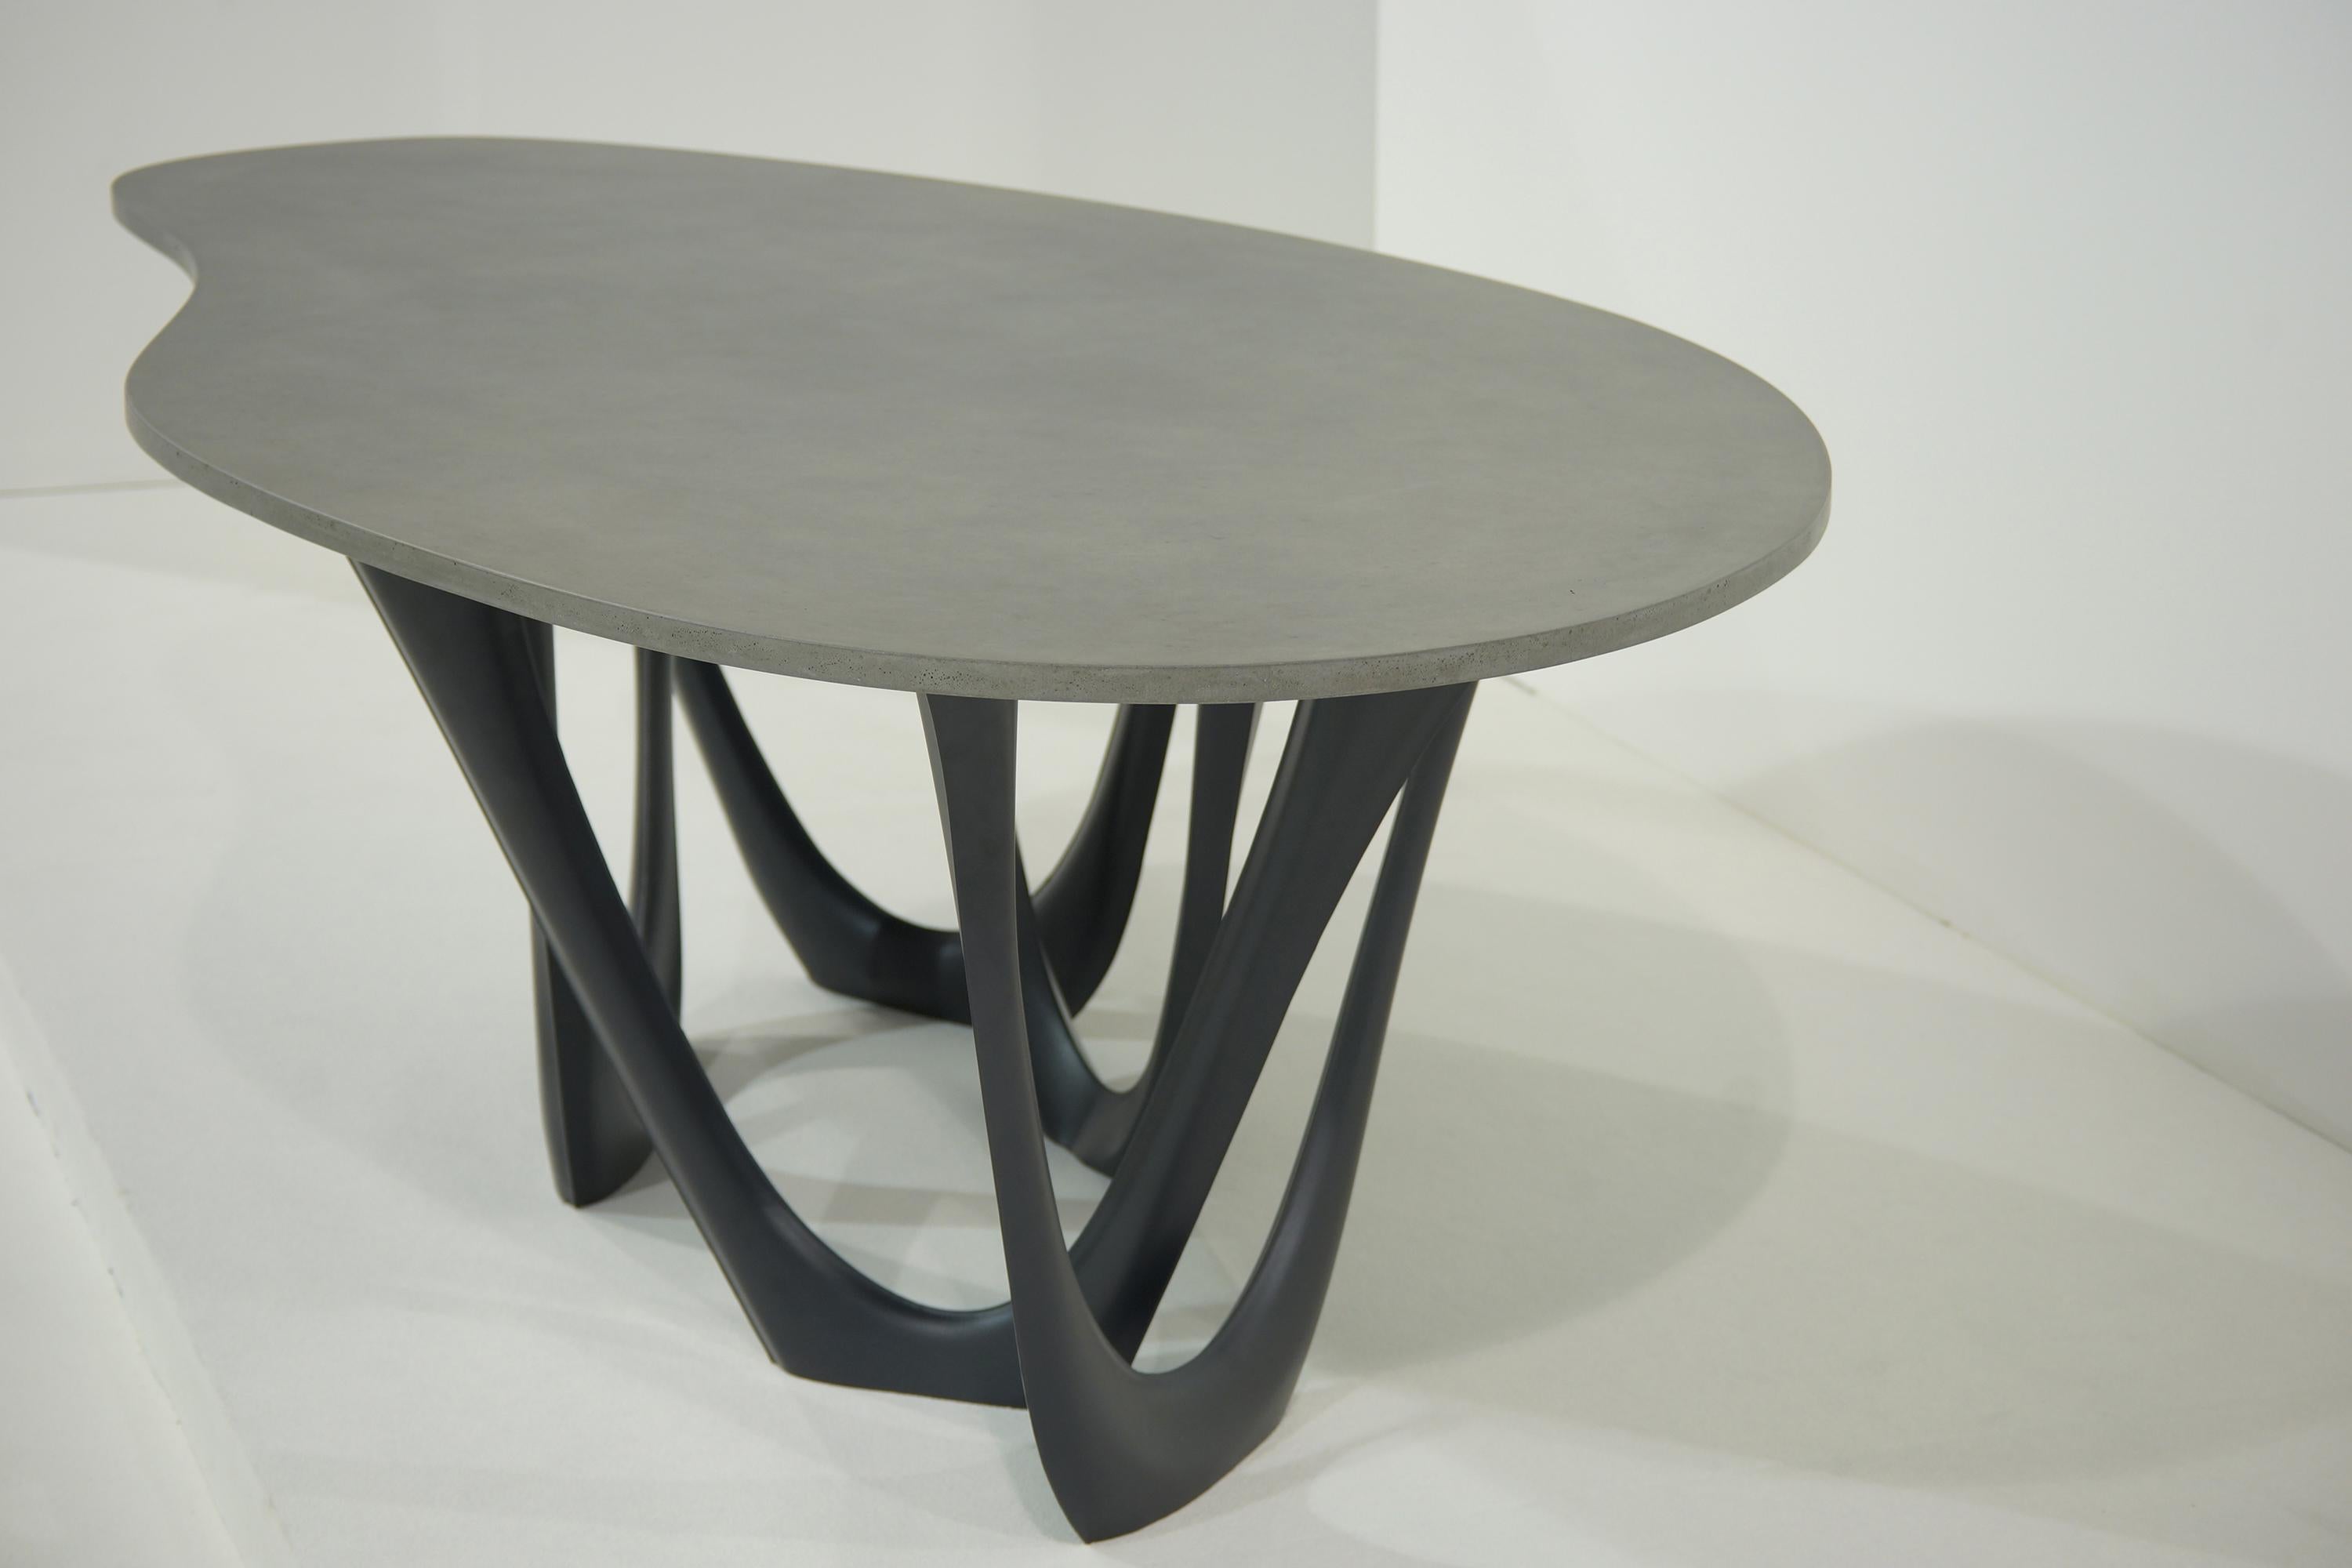 Powder-Coated Black Glossy Concrete Steel Sculptural G-Table by Zieta For Sale